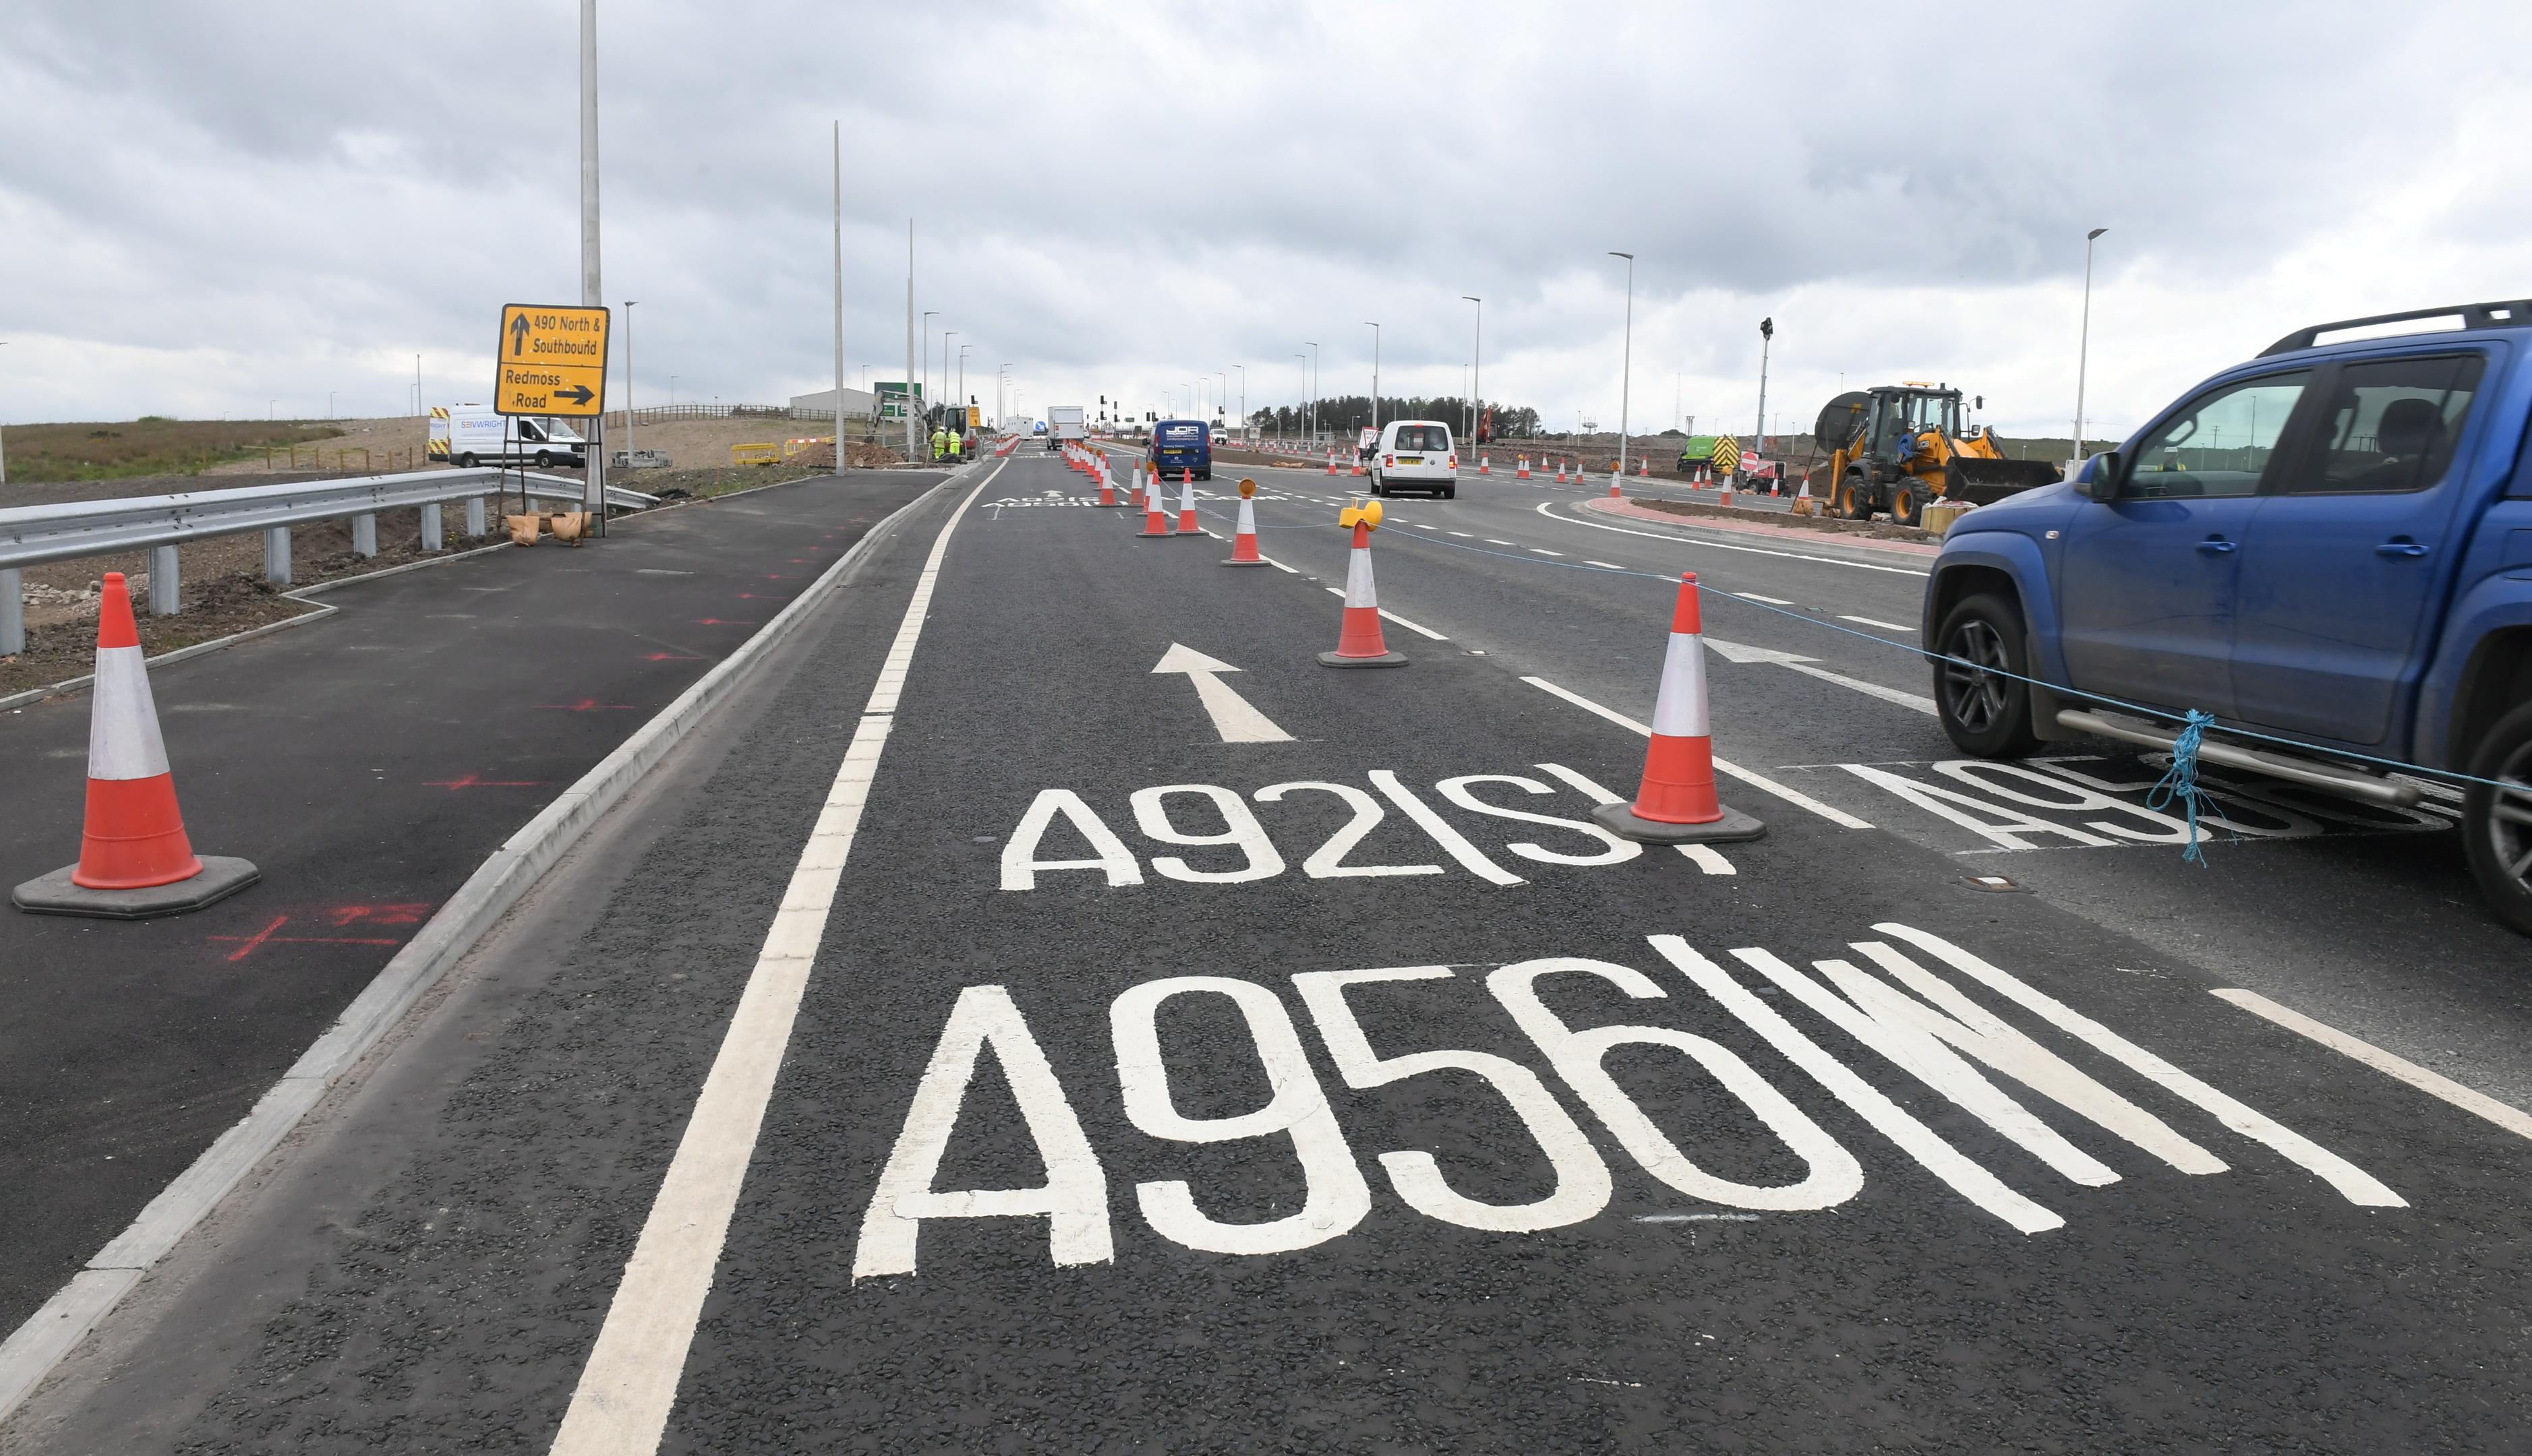 Road markings referring to the current A90 as the A92 on the Charleston flyover. Picture by Chris Sumner.